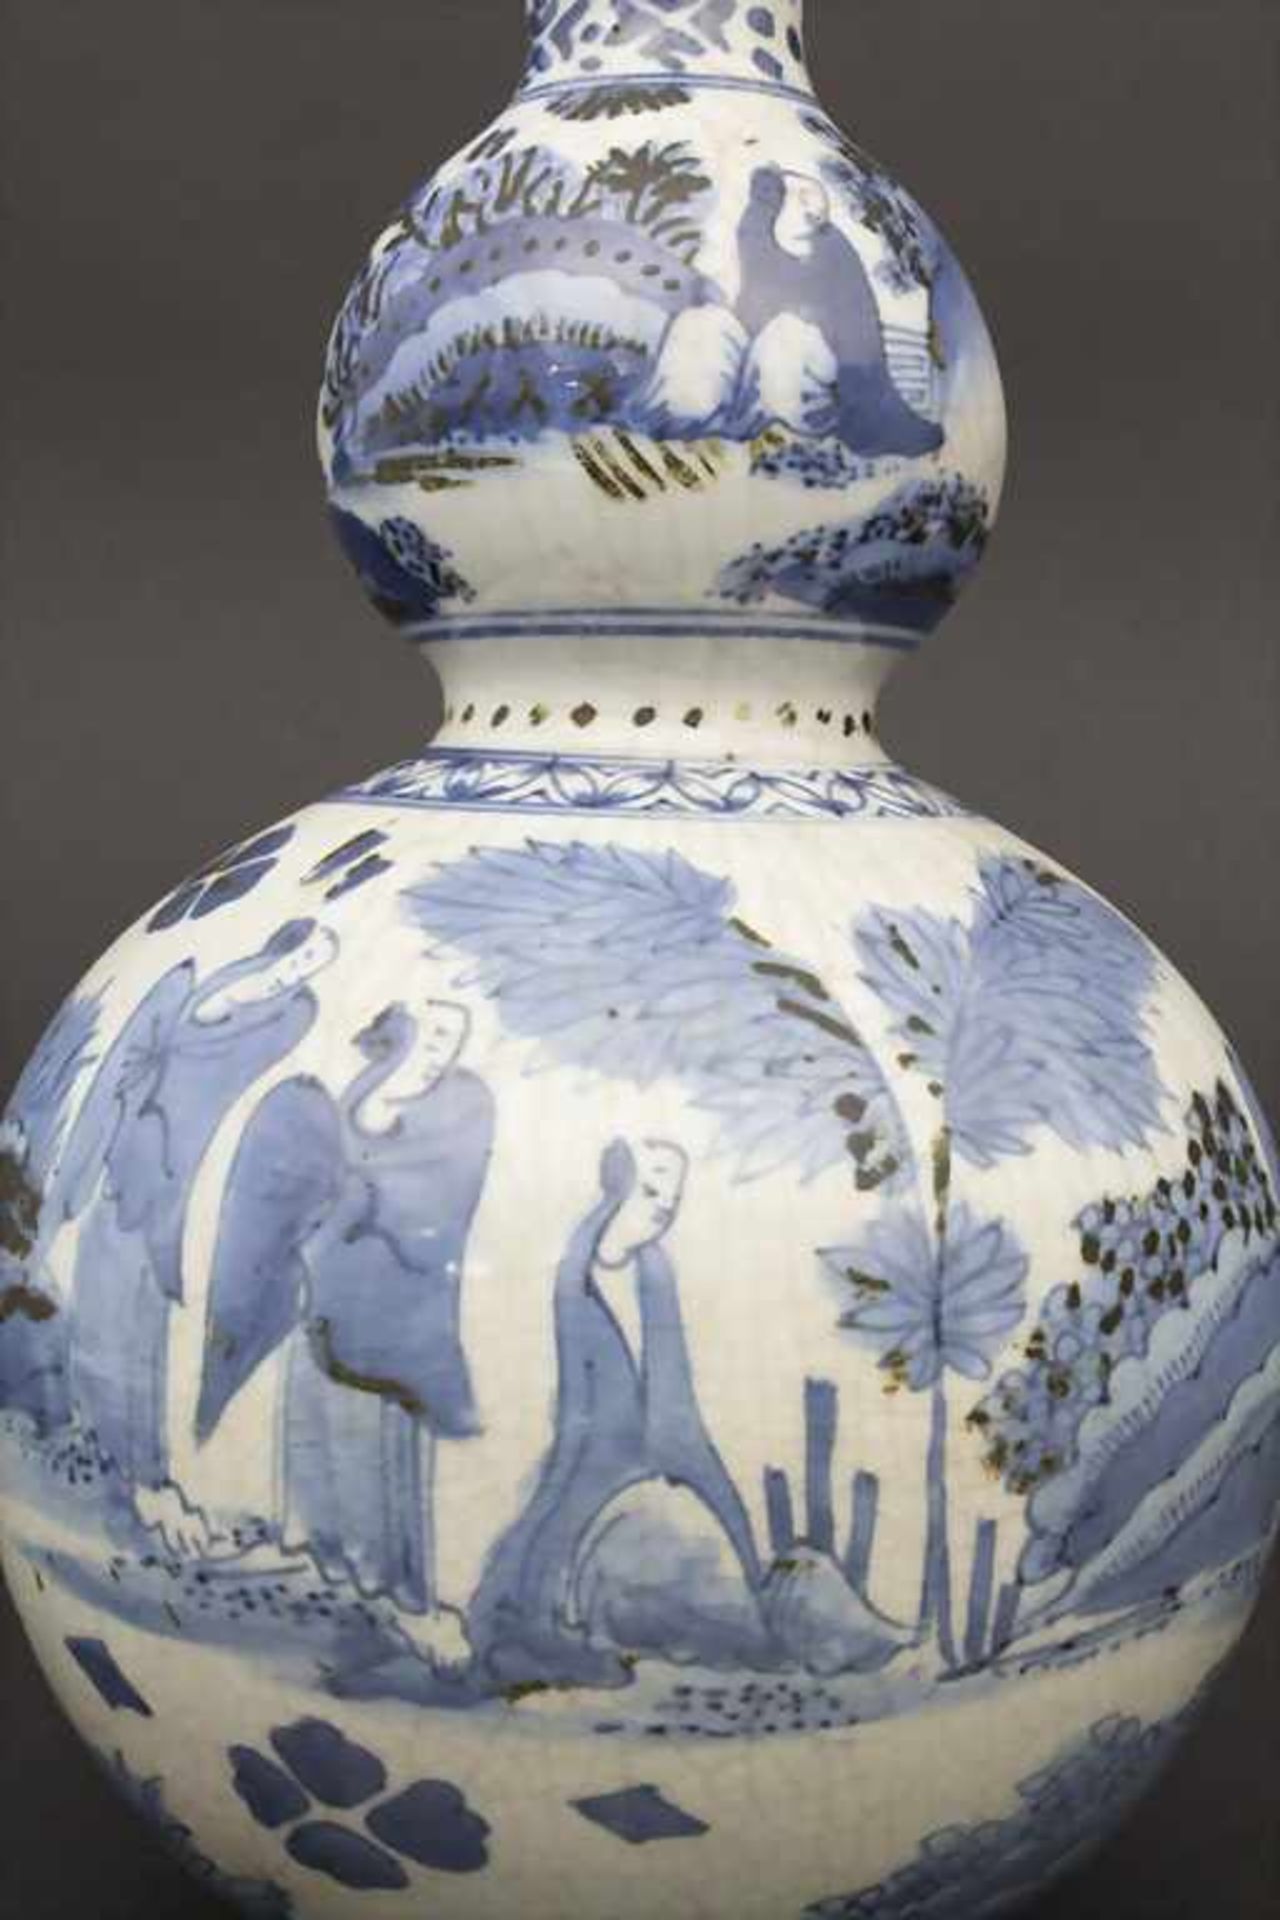 Ziervase / A vase, China, Ming/Qing- Dynastie - Image 7 of 7